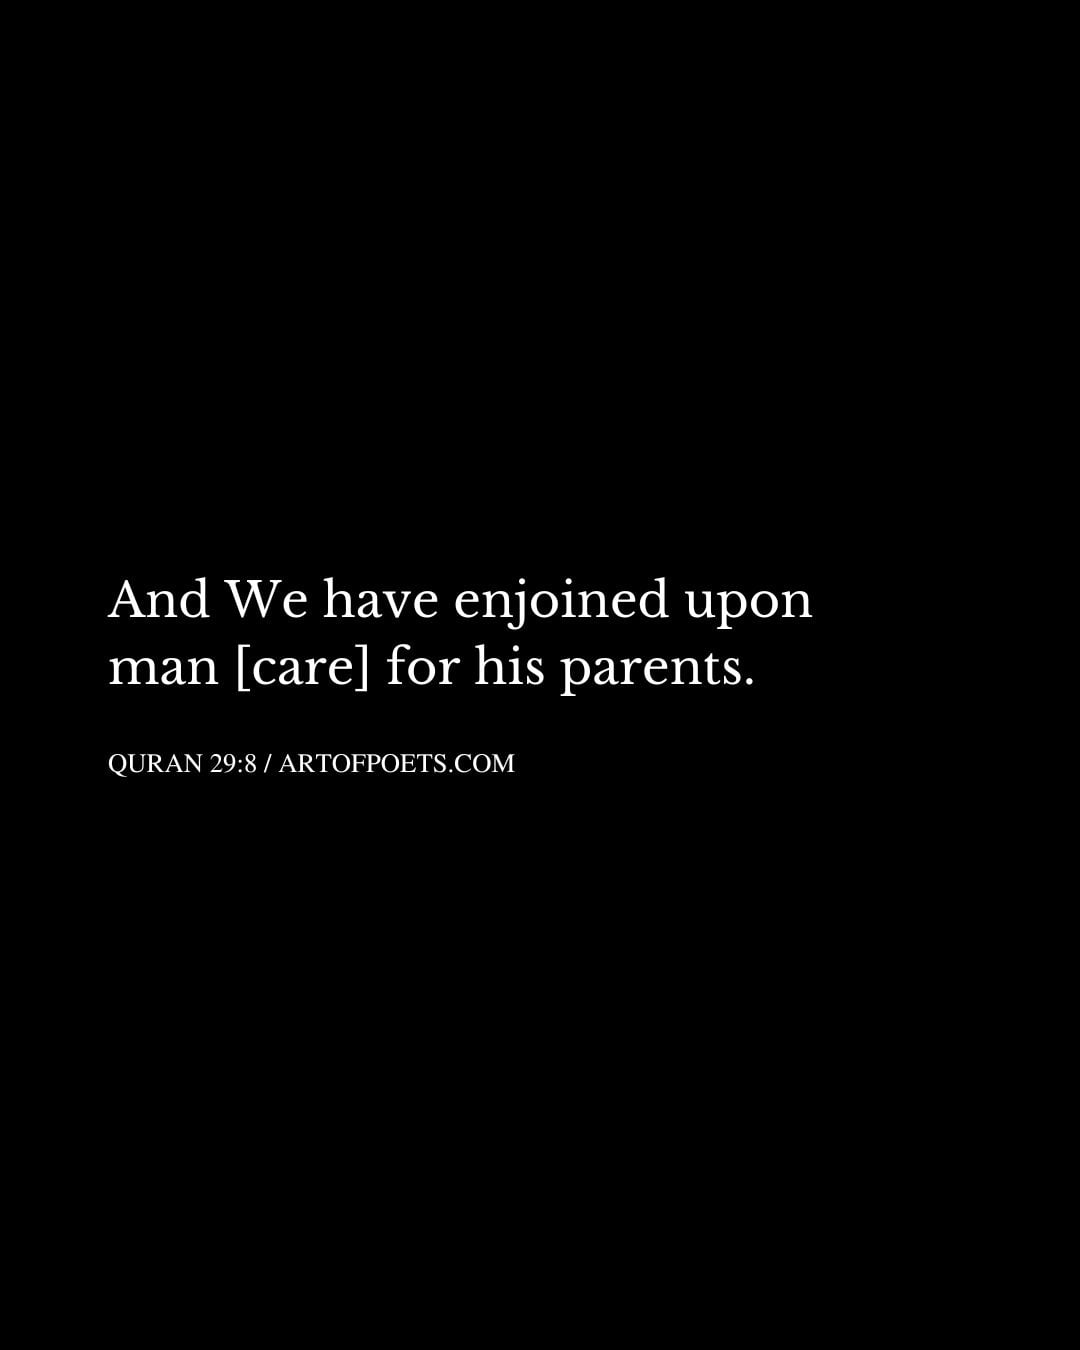 And We have enjoined upon man care for his parents